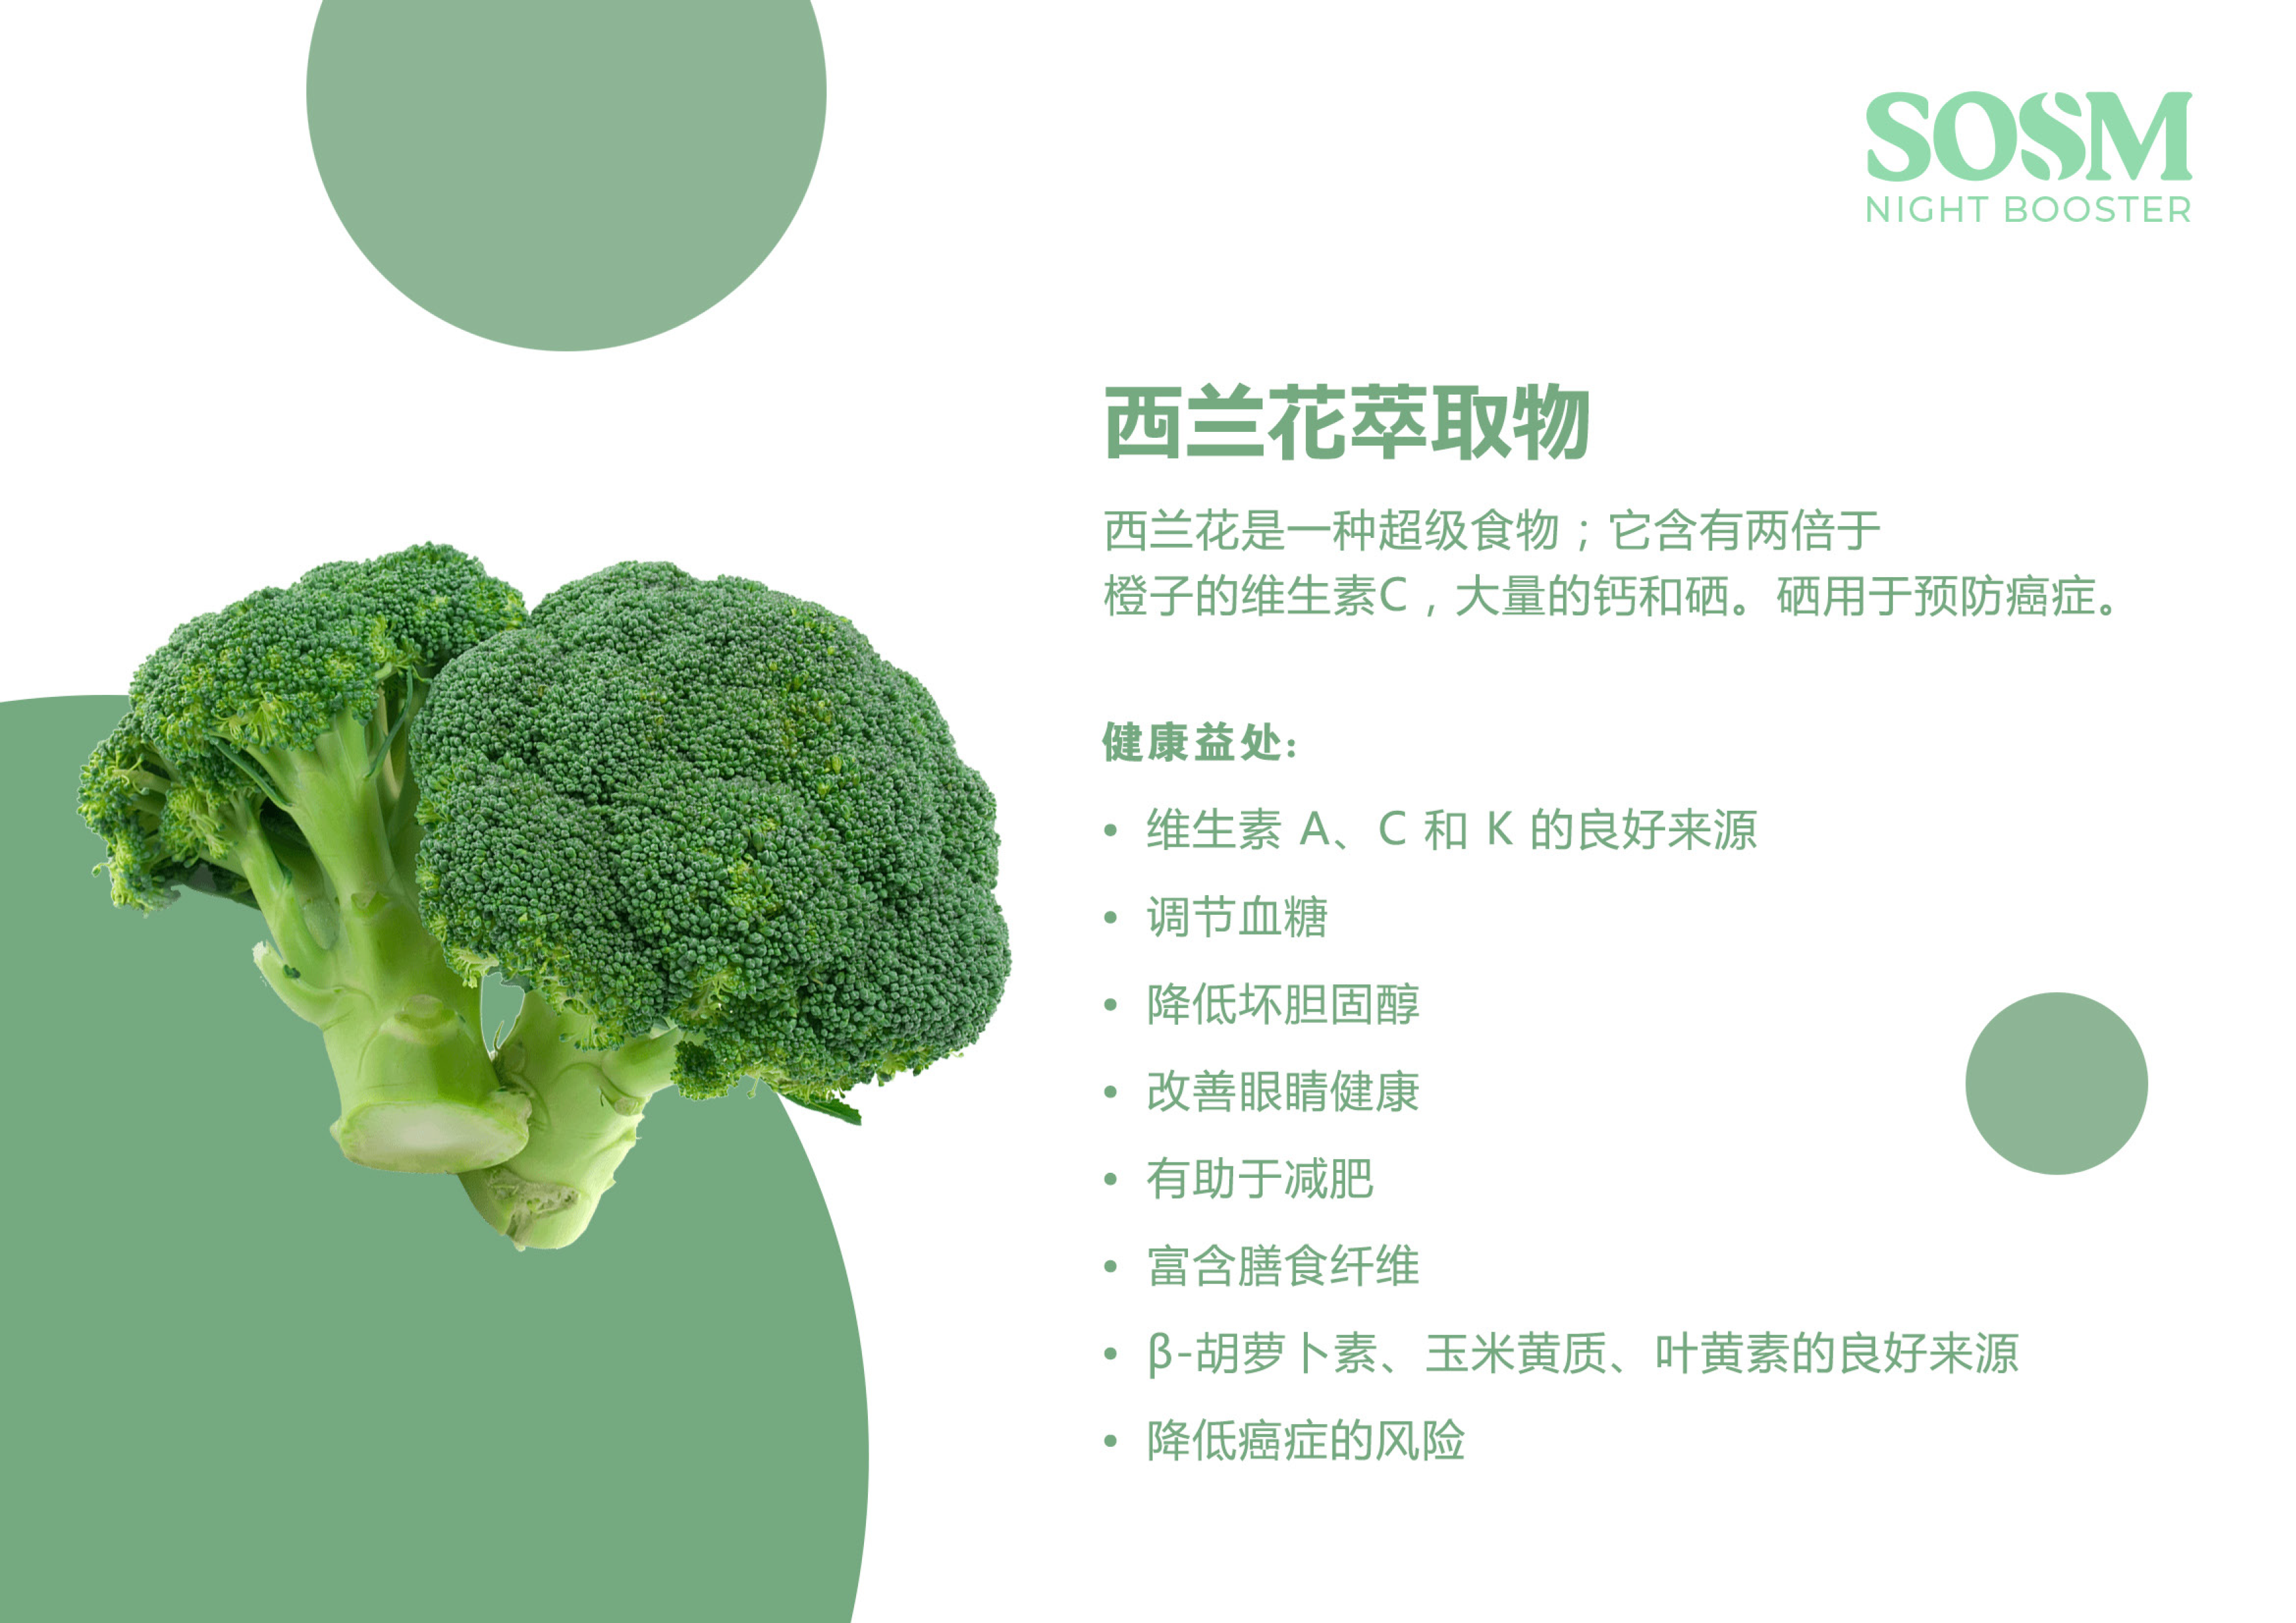 SOSM Night Booster 5 Main Ingredients -  Broccoli Extract